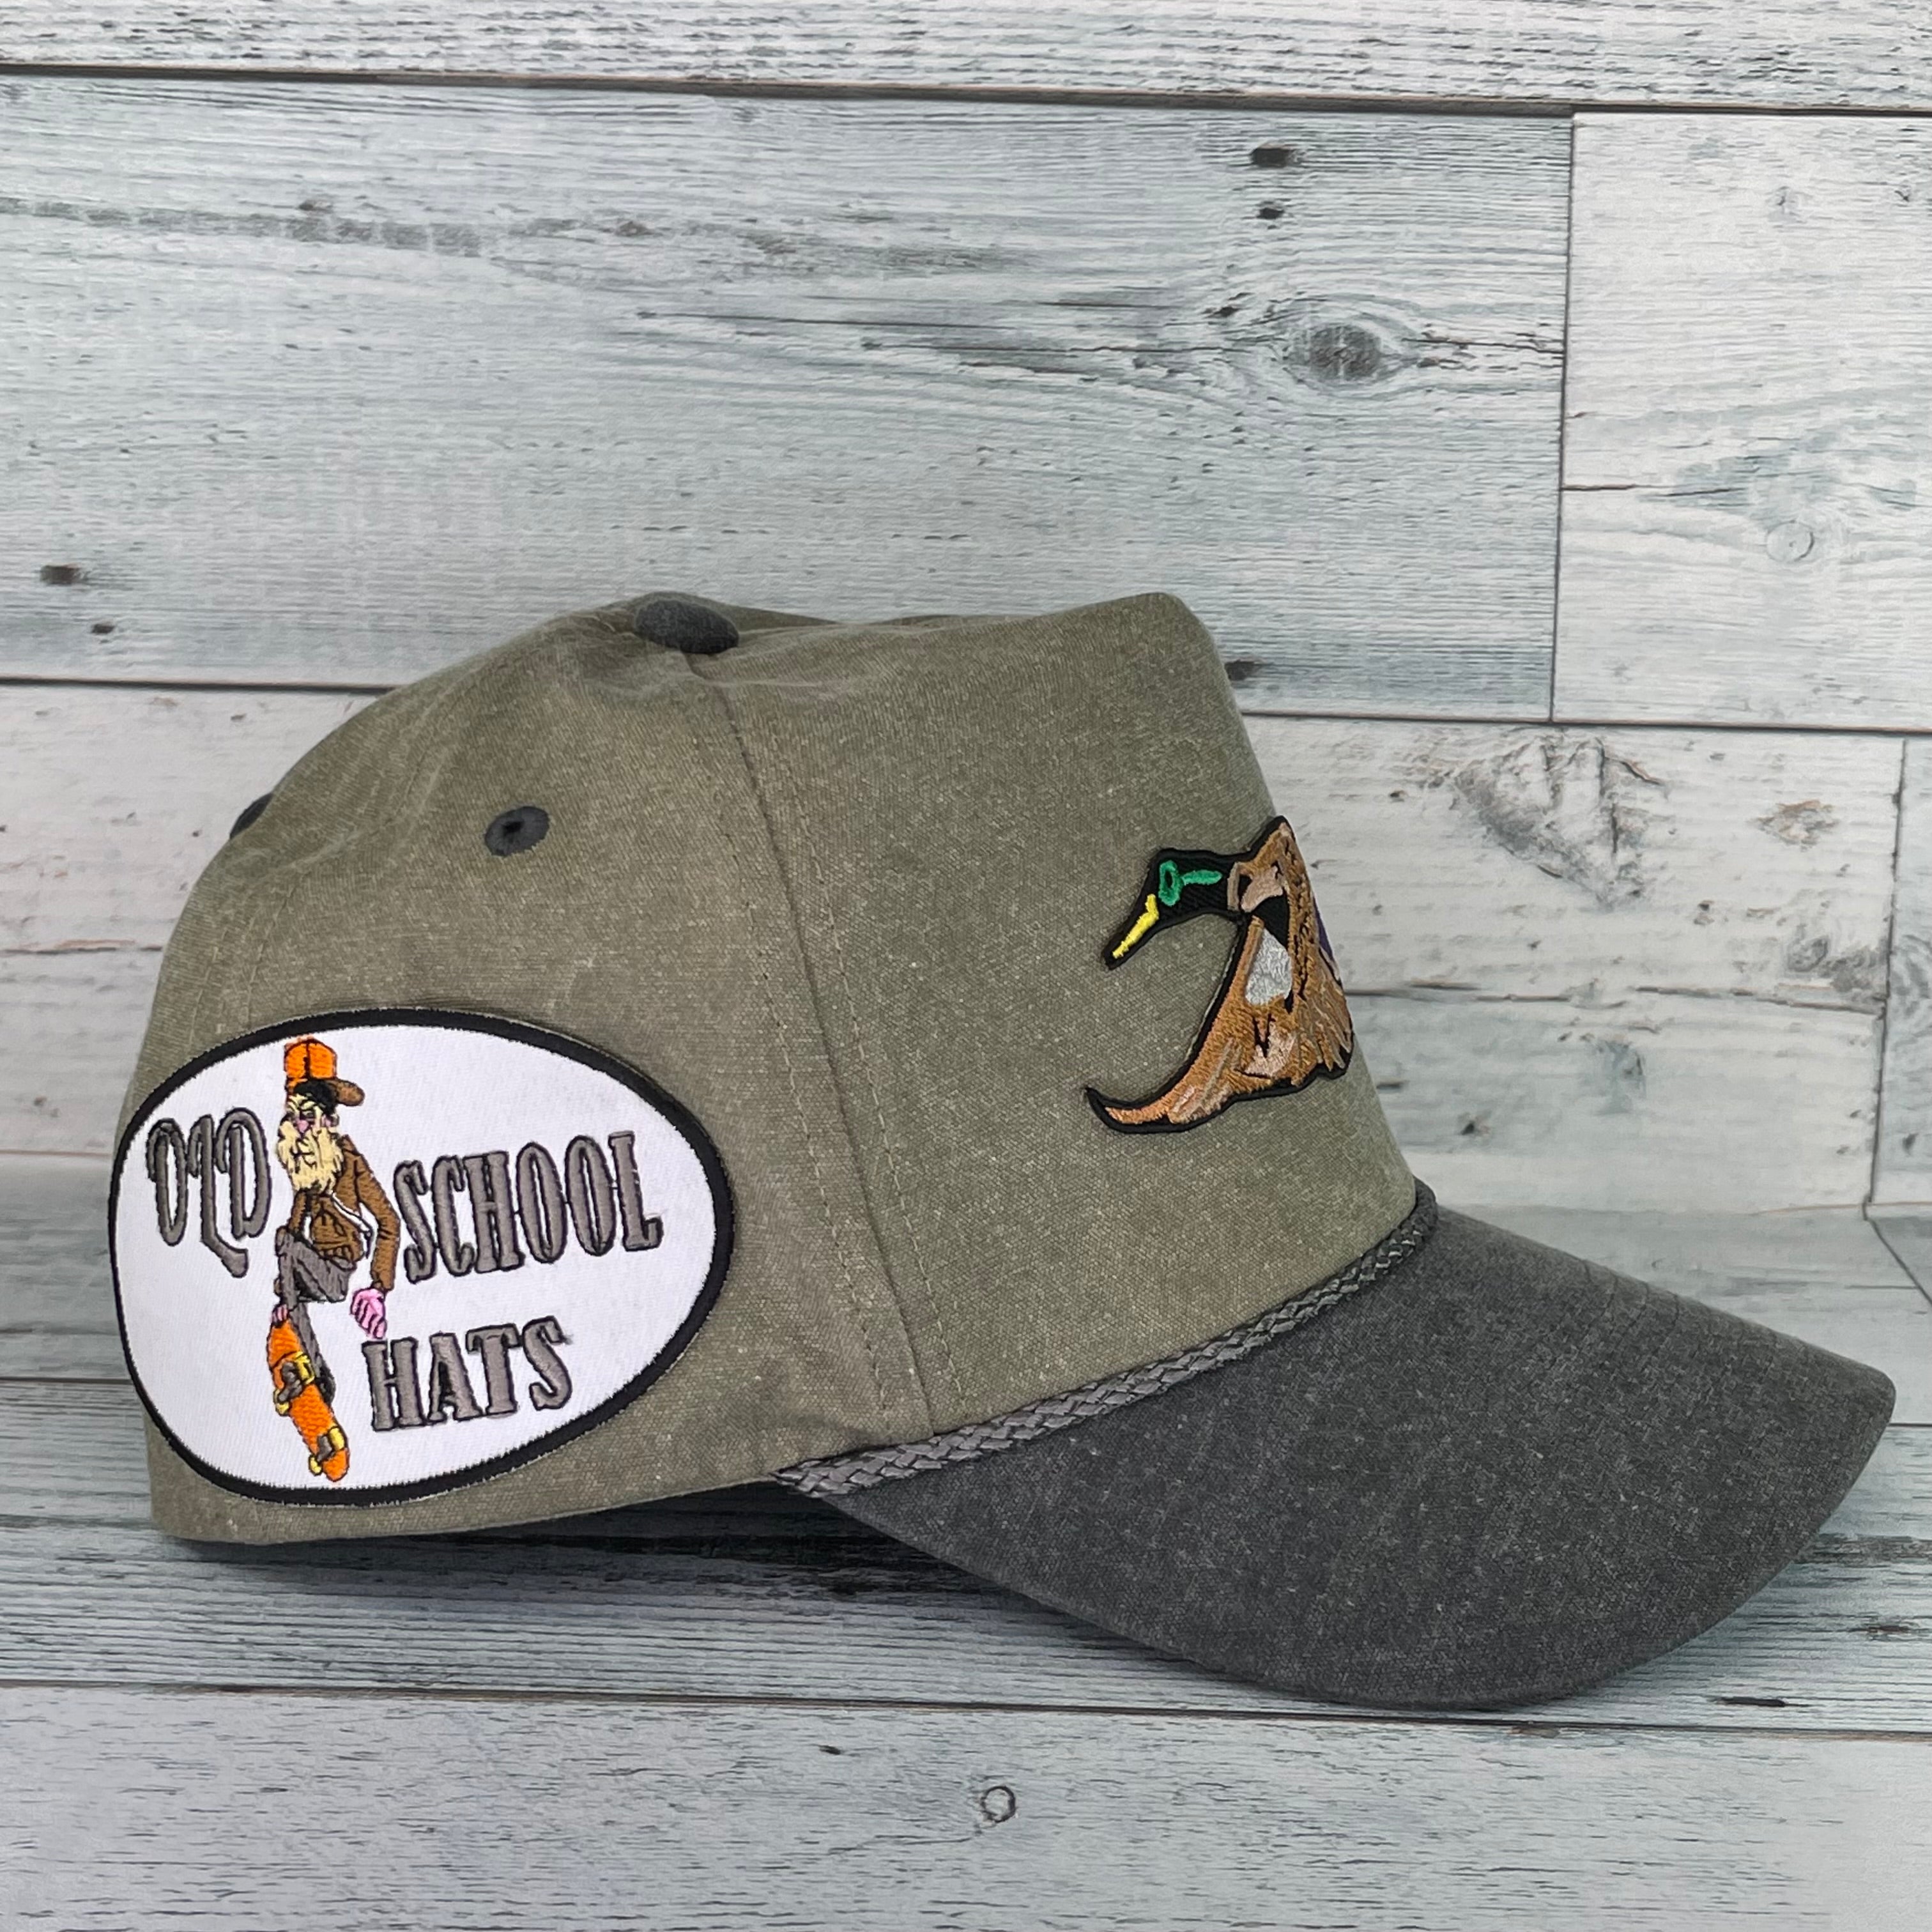 I'd Rather Be Fishing glow in the dark fish Vintage Curve Brim Rope Sn –  Old School Hats